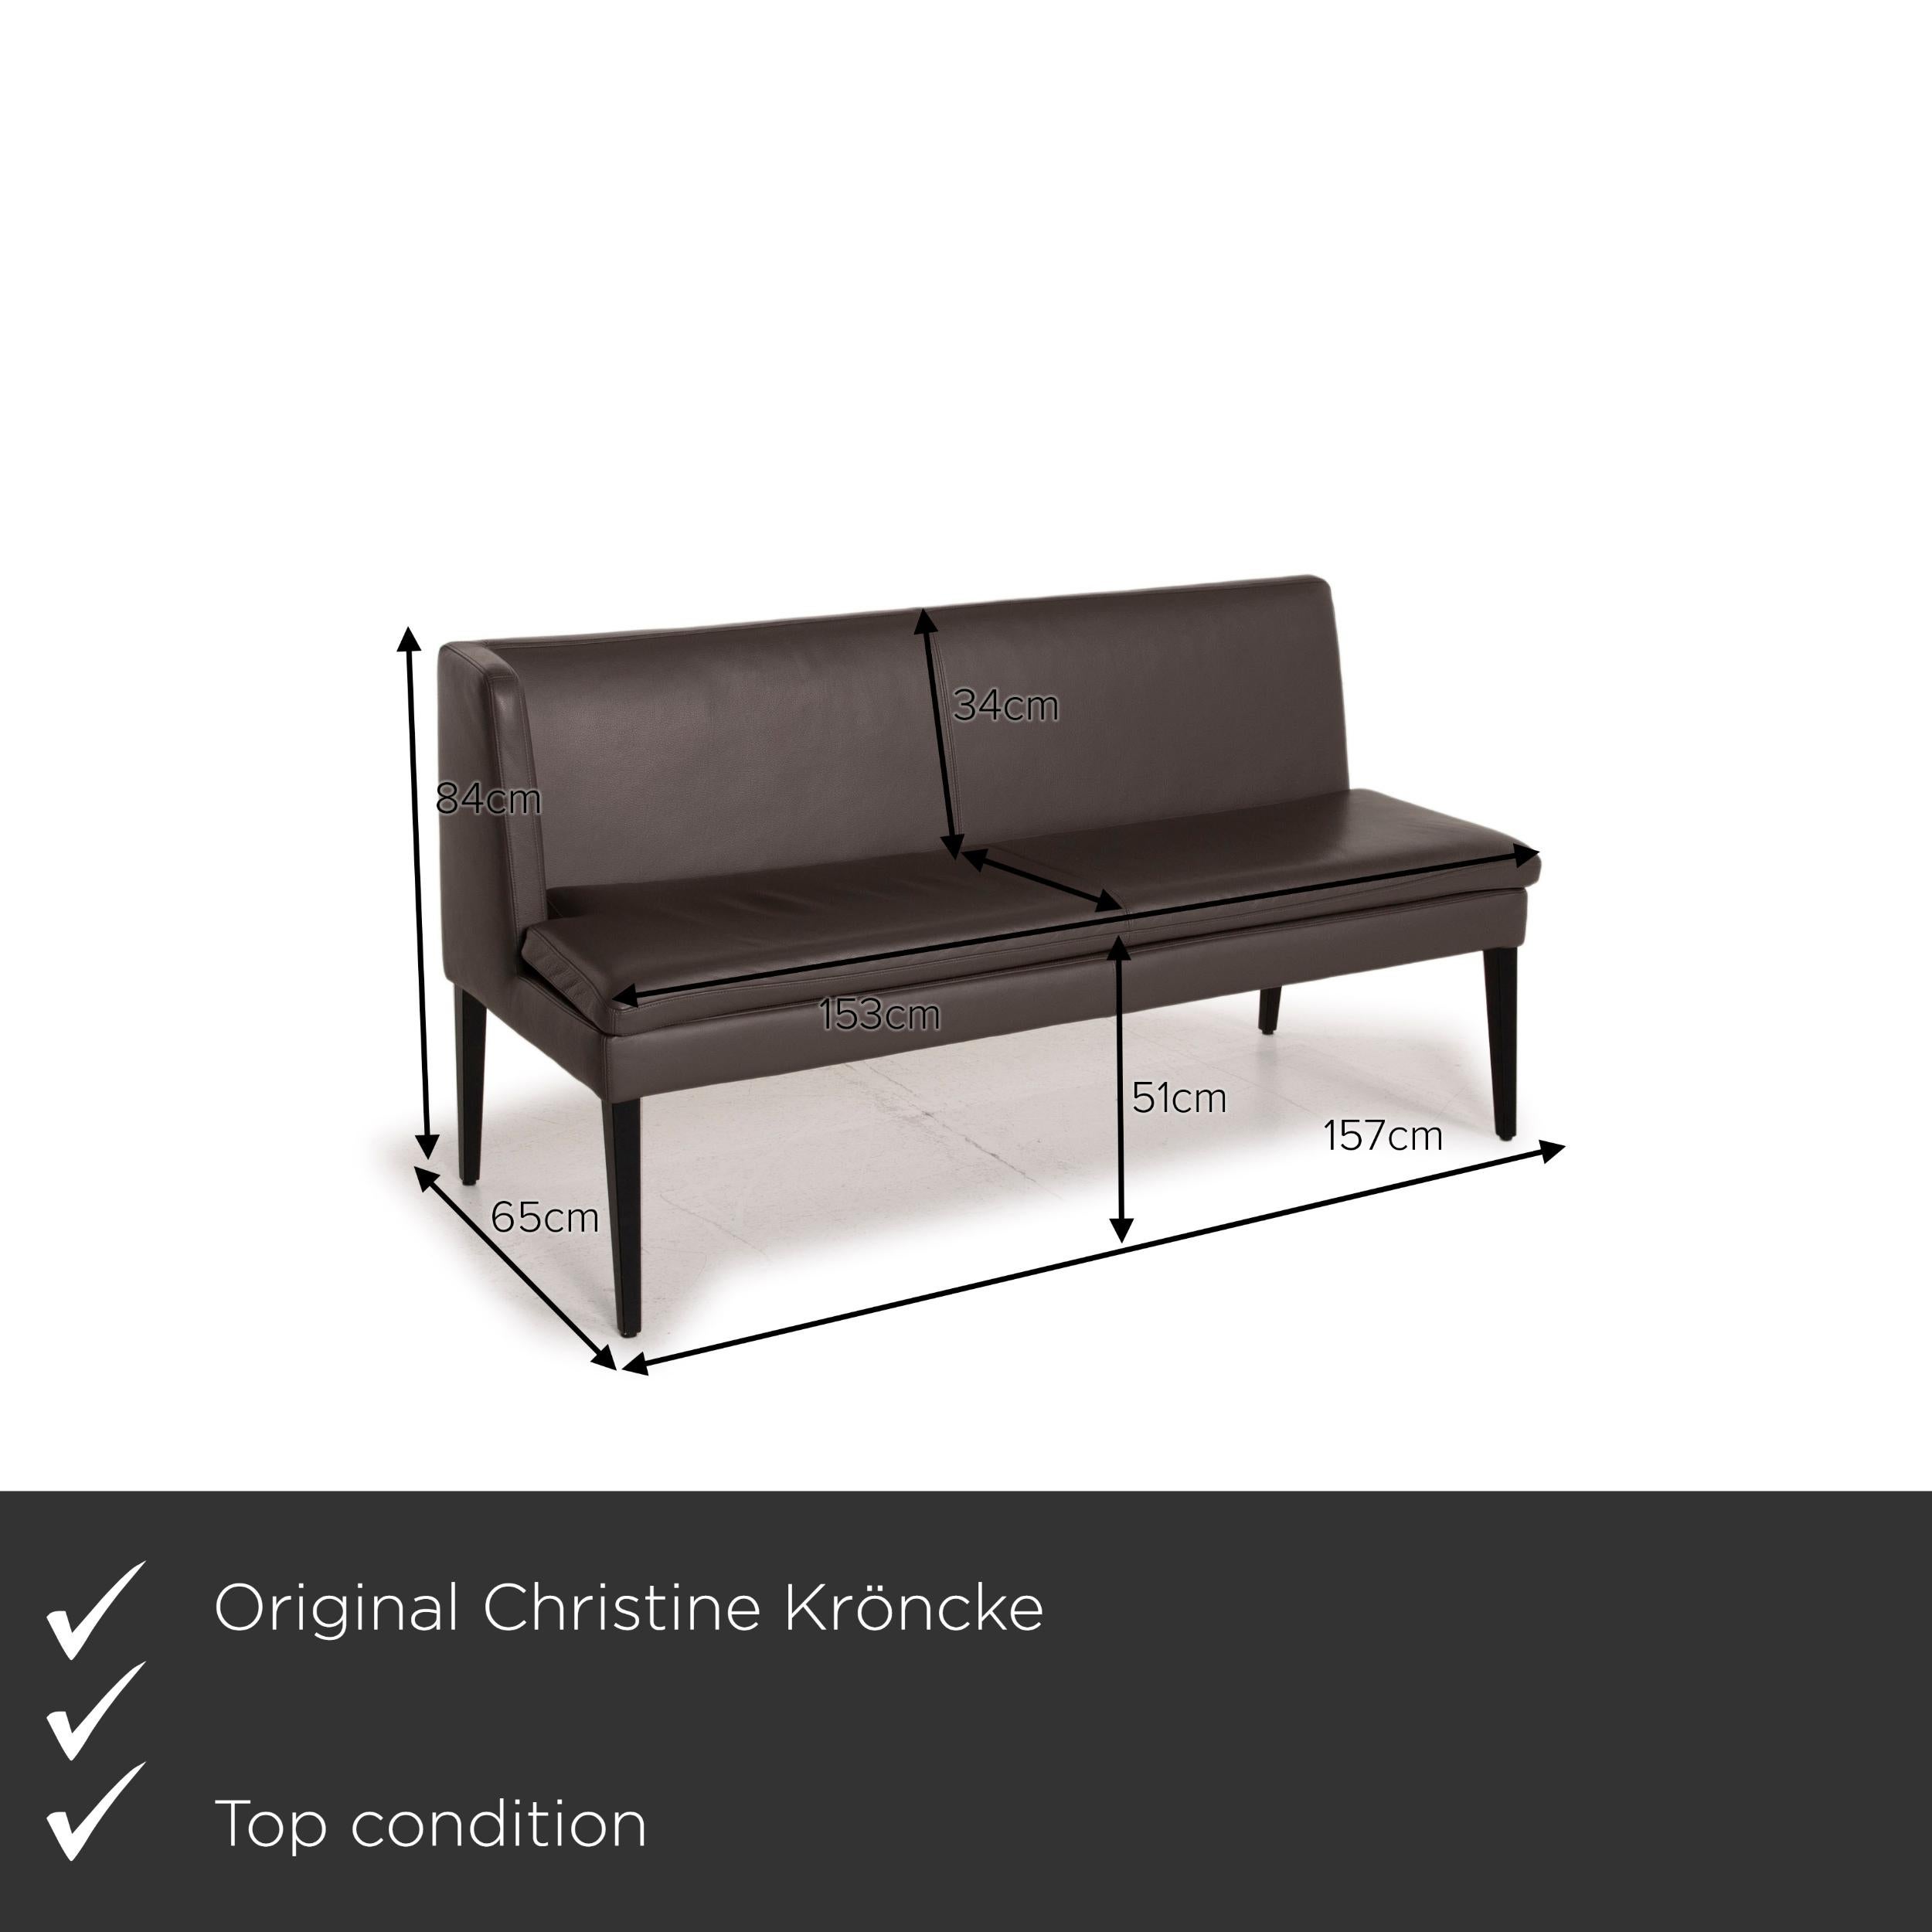 We present to you a Christine Kröncke Dinegra leather bench gray Bench dark gray.


 Product measurements in centimeters:
 

Depth: 65
Width: 157
Height: 84
Seat height: 51
Rest height:
Seat depth: 46
Seat width: 153
Back height: 34.
 